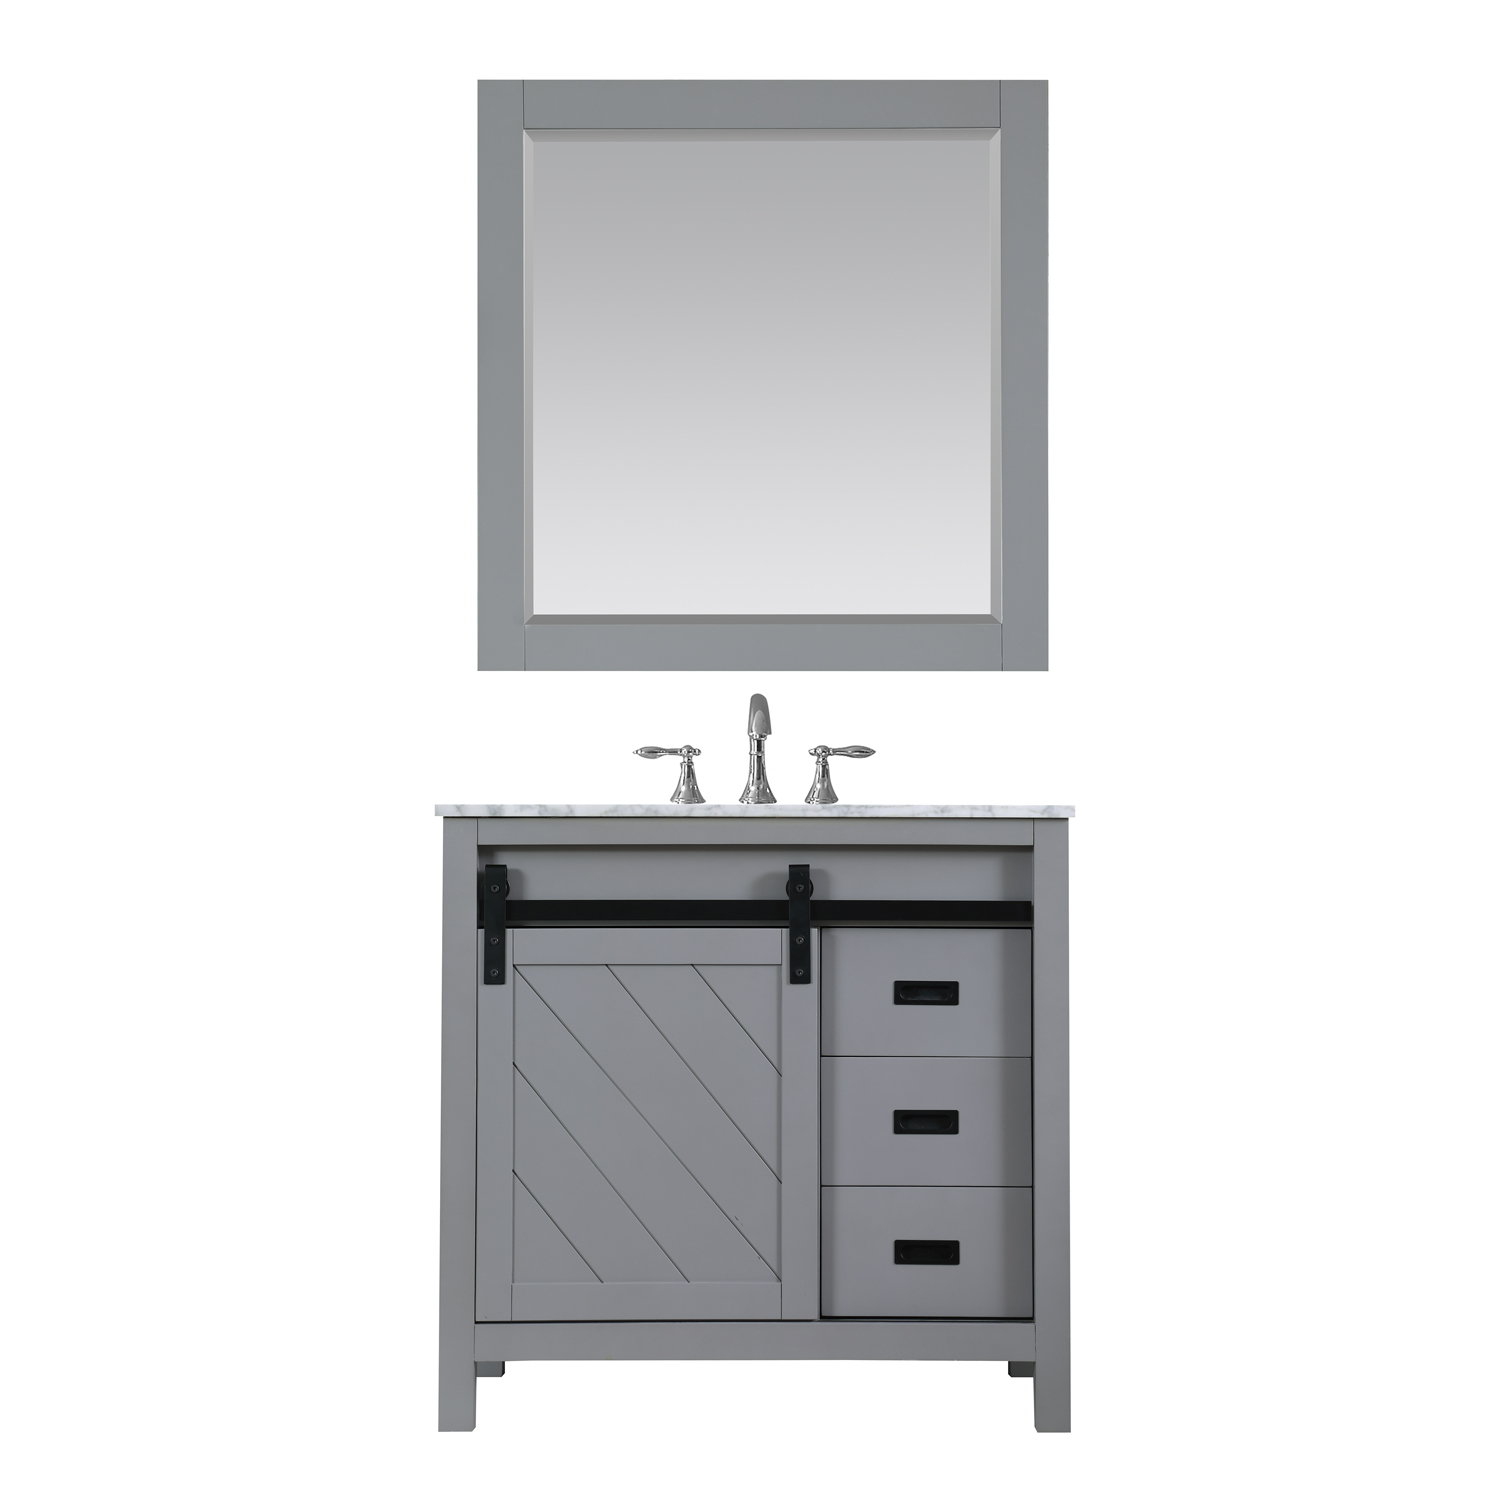 Issac Edwards Collection 36" Single Bathroom Vanity Set in Gray and Carrara White Marble Countertop without Mirror 